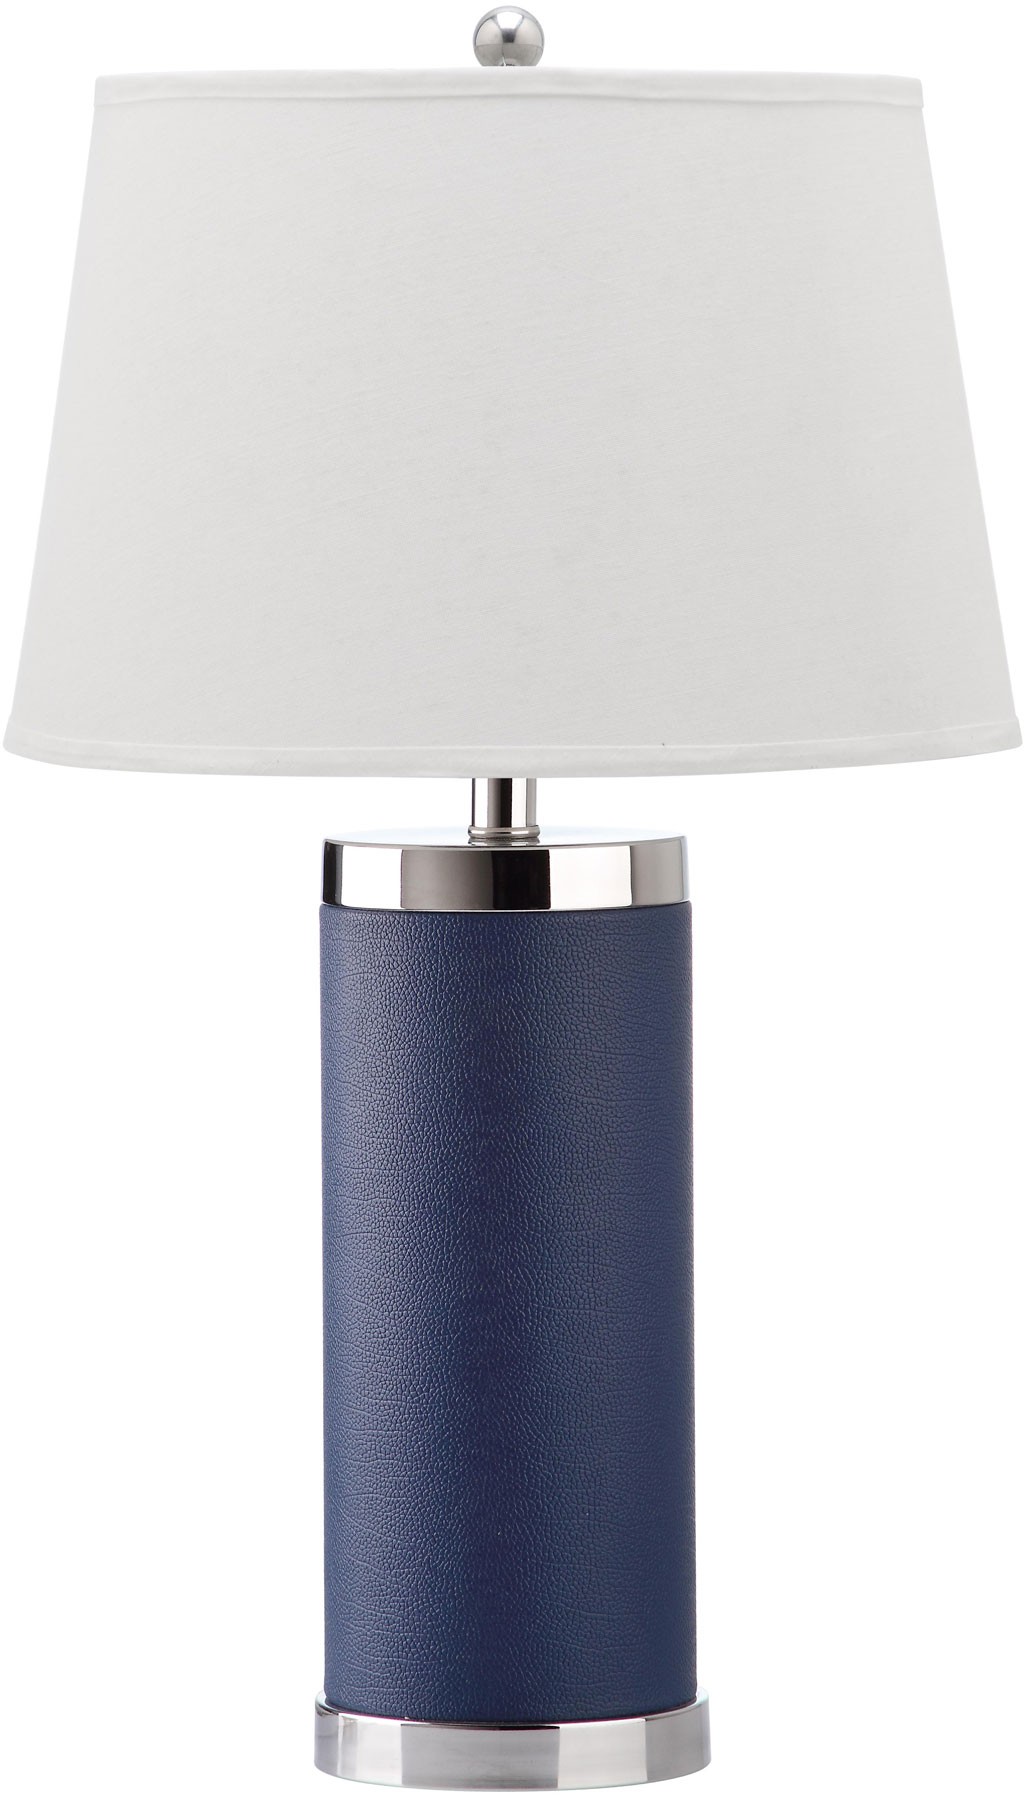 Choose navy blue table lamps if looking for beaty in